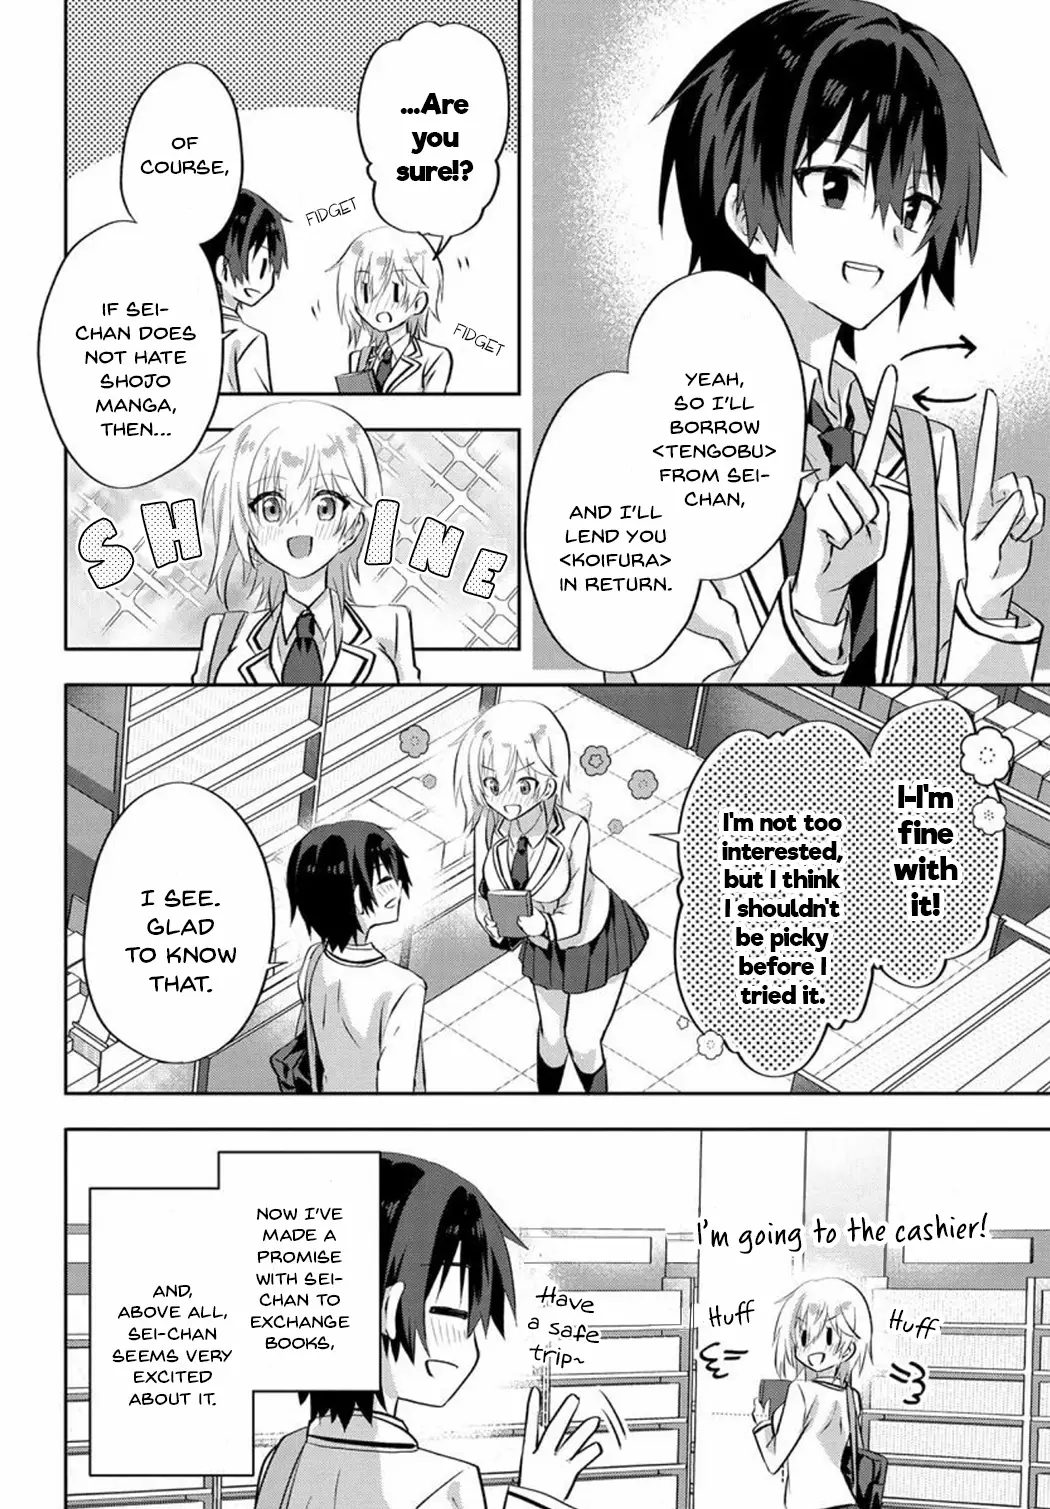 Since I’Ve Entered The World Of Romantic Comedy Manga, I’Ll Do My Best To Make The Losing Heroine Happy - 5.1 page 10-8cf792fb